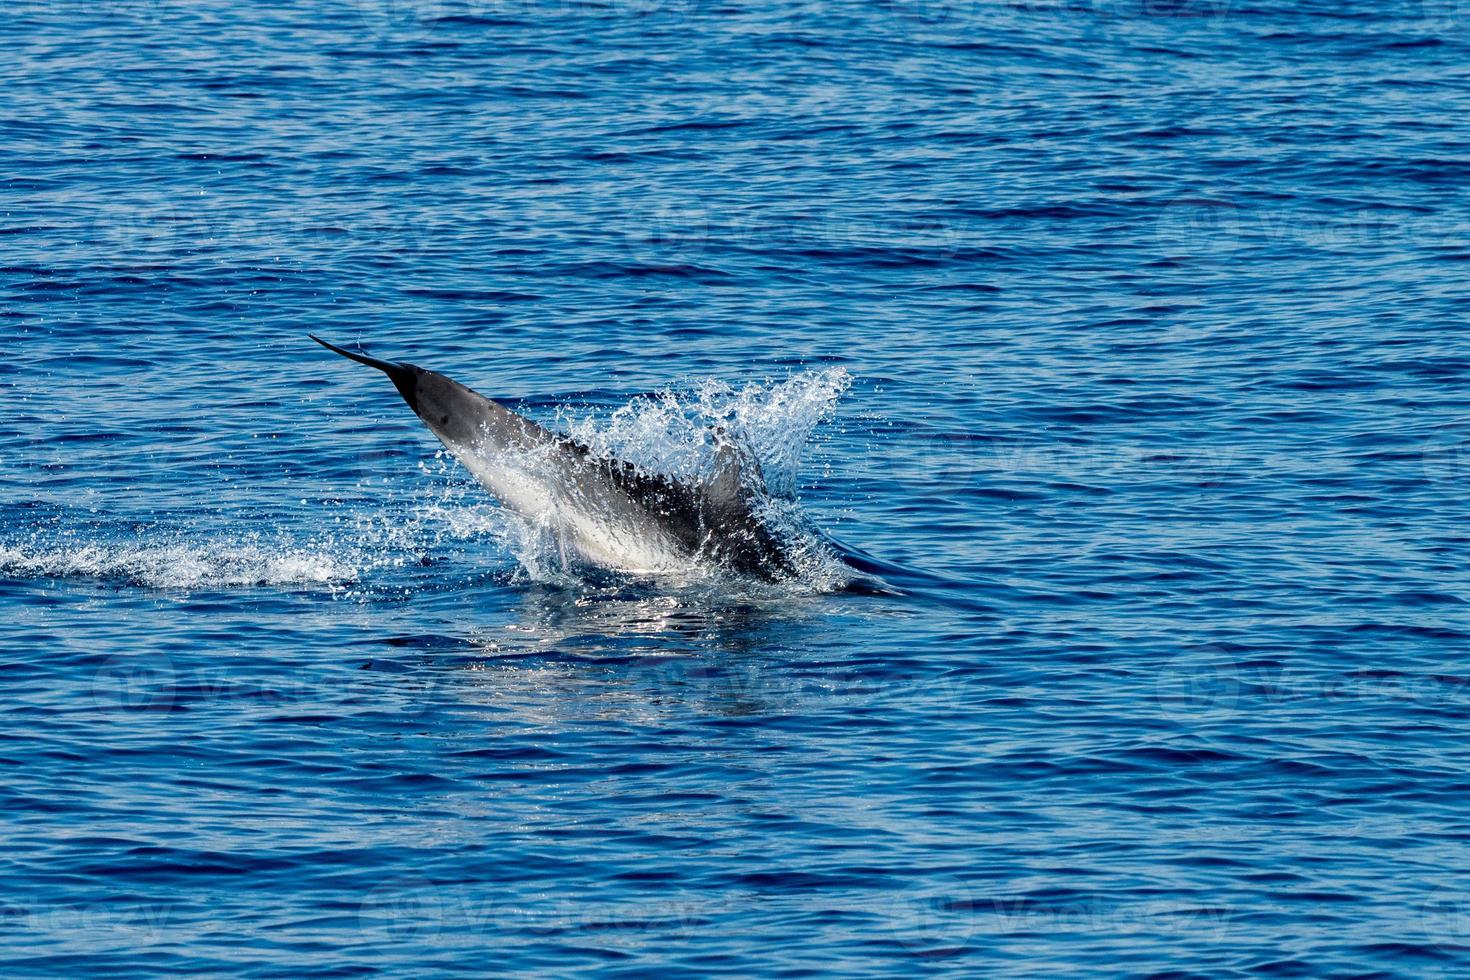 Dolphin while jumping in the deep blue sea photo